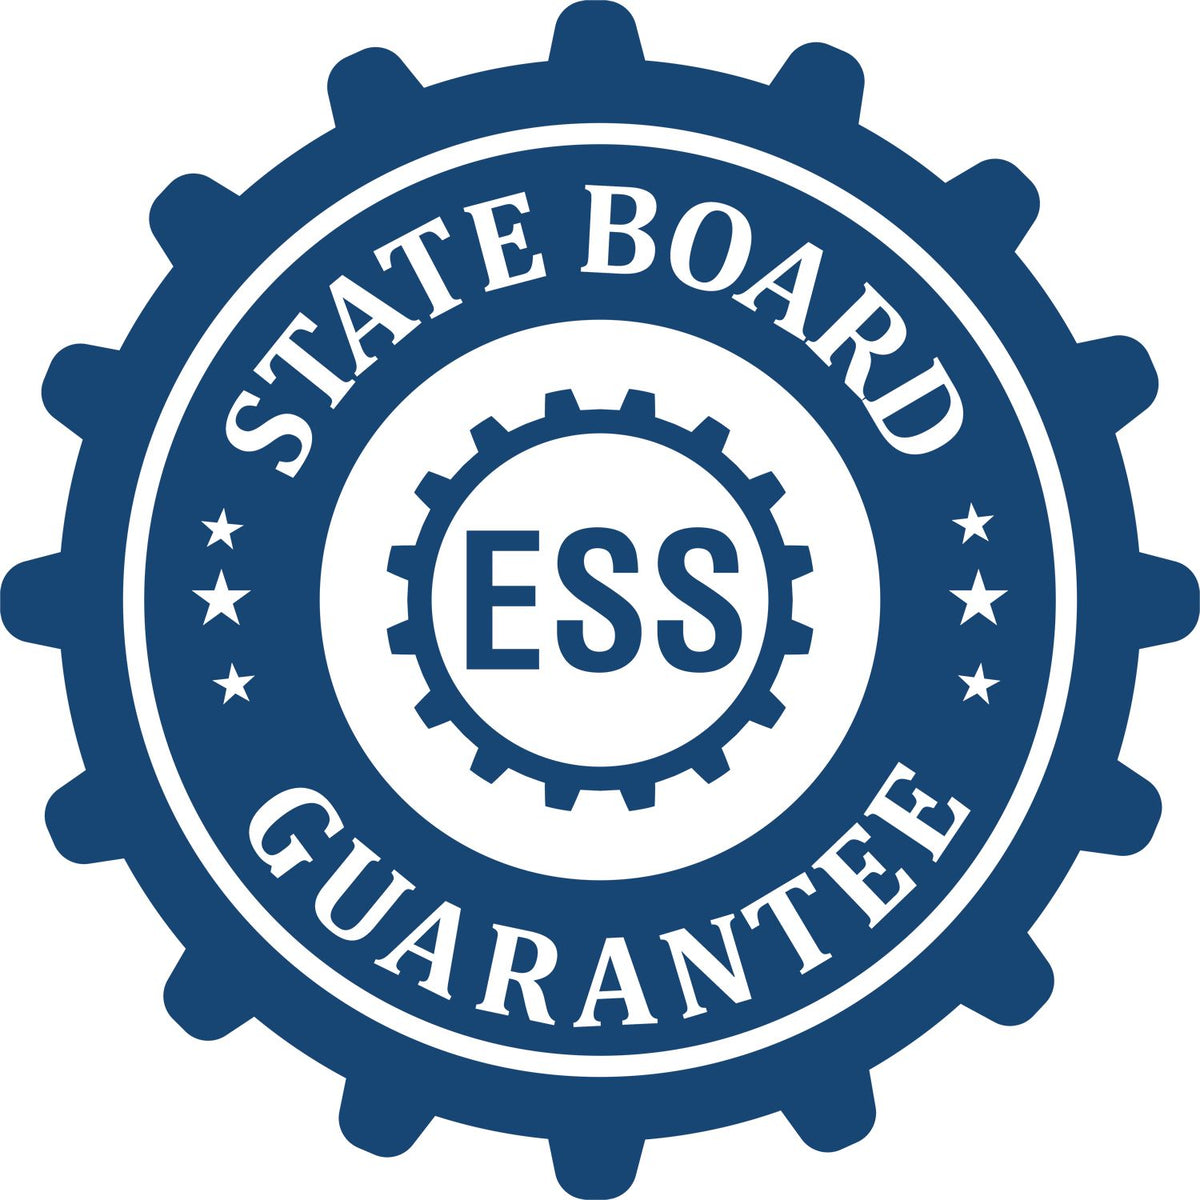 An emblem in a gear shape illustrating a state board guarantee for the Hybrid Michigan Engineer Seal